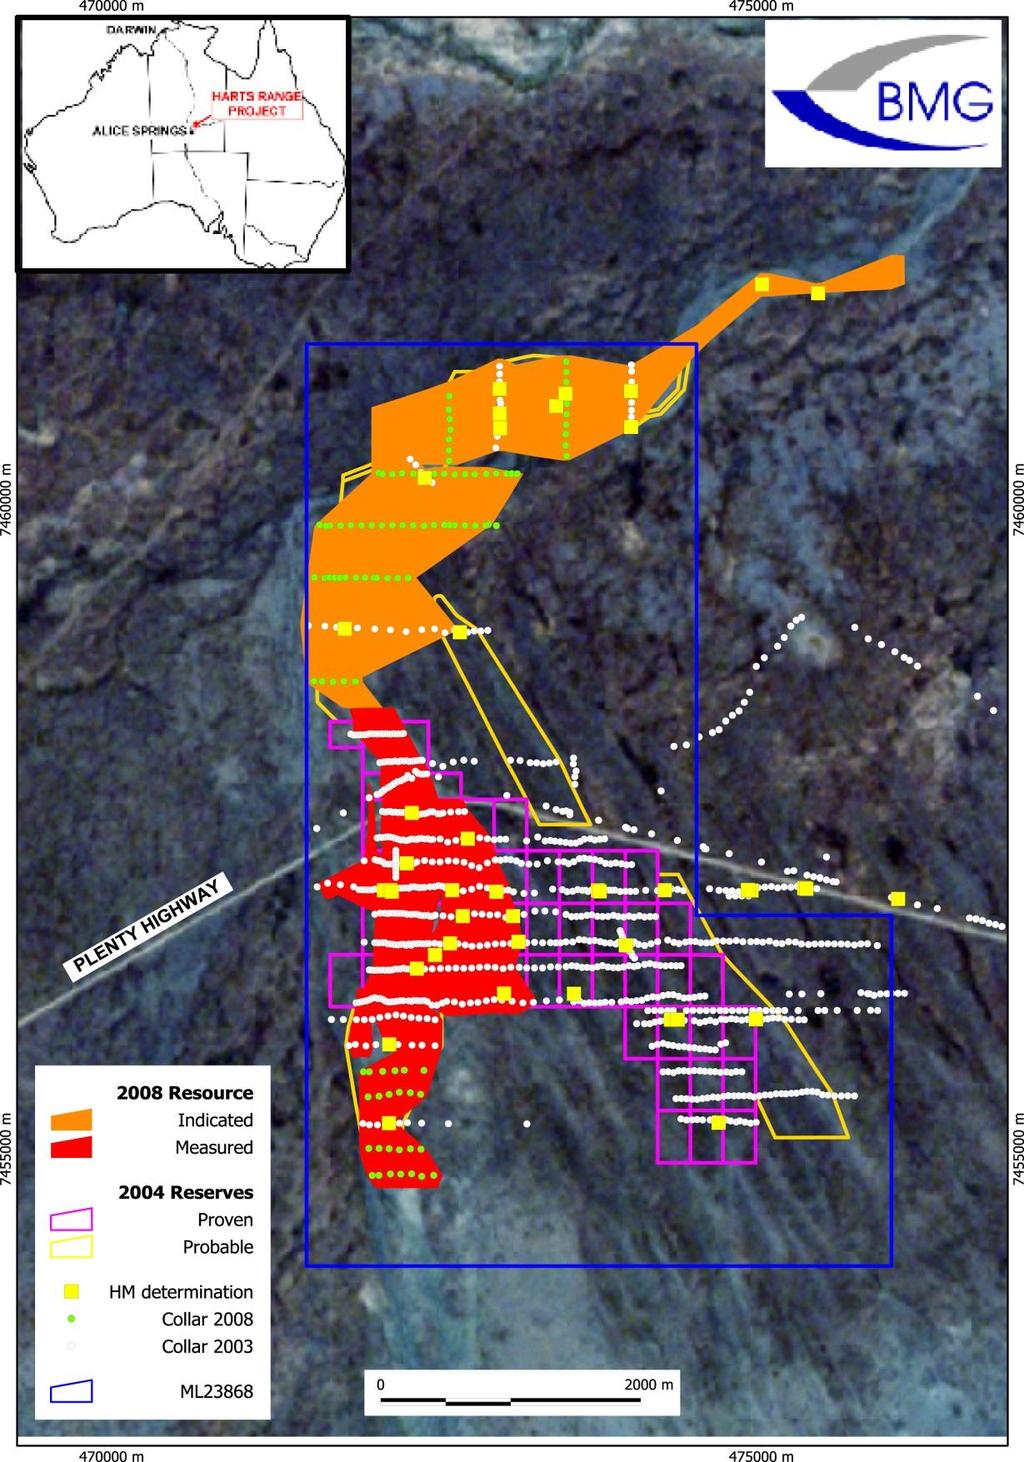 ASX Release 24 September 2014 The Project contains a large established JORC resource of Minerals within unconsolidated surficial sand in dunes, channels and floodplains.